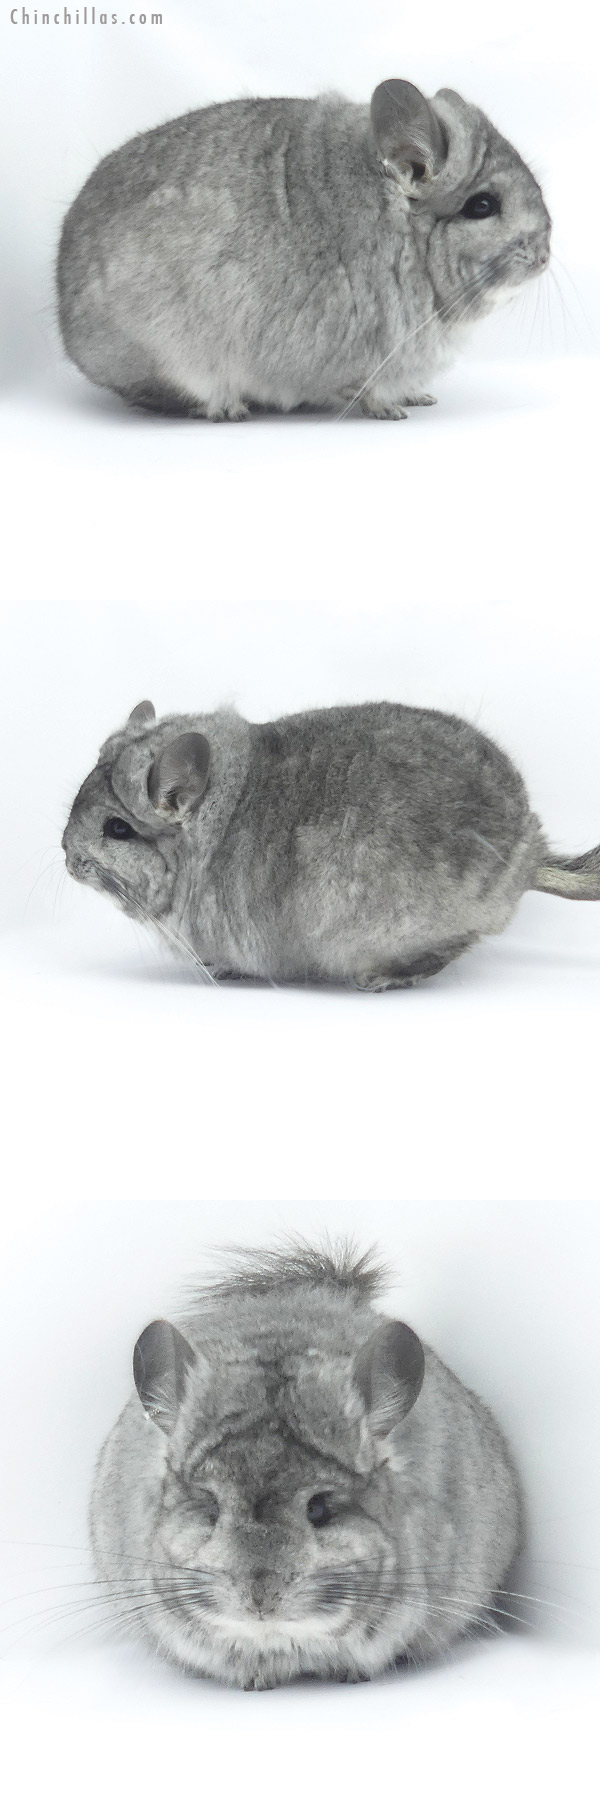 Chinchilla or related item offered for sale or export on Chinchillas.com - 19406 Exceptional Blocky Standard  Royal Persian Angora Male Chinchilla